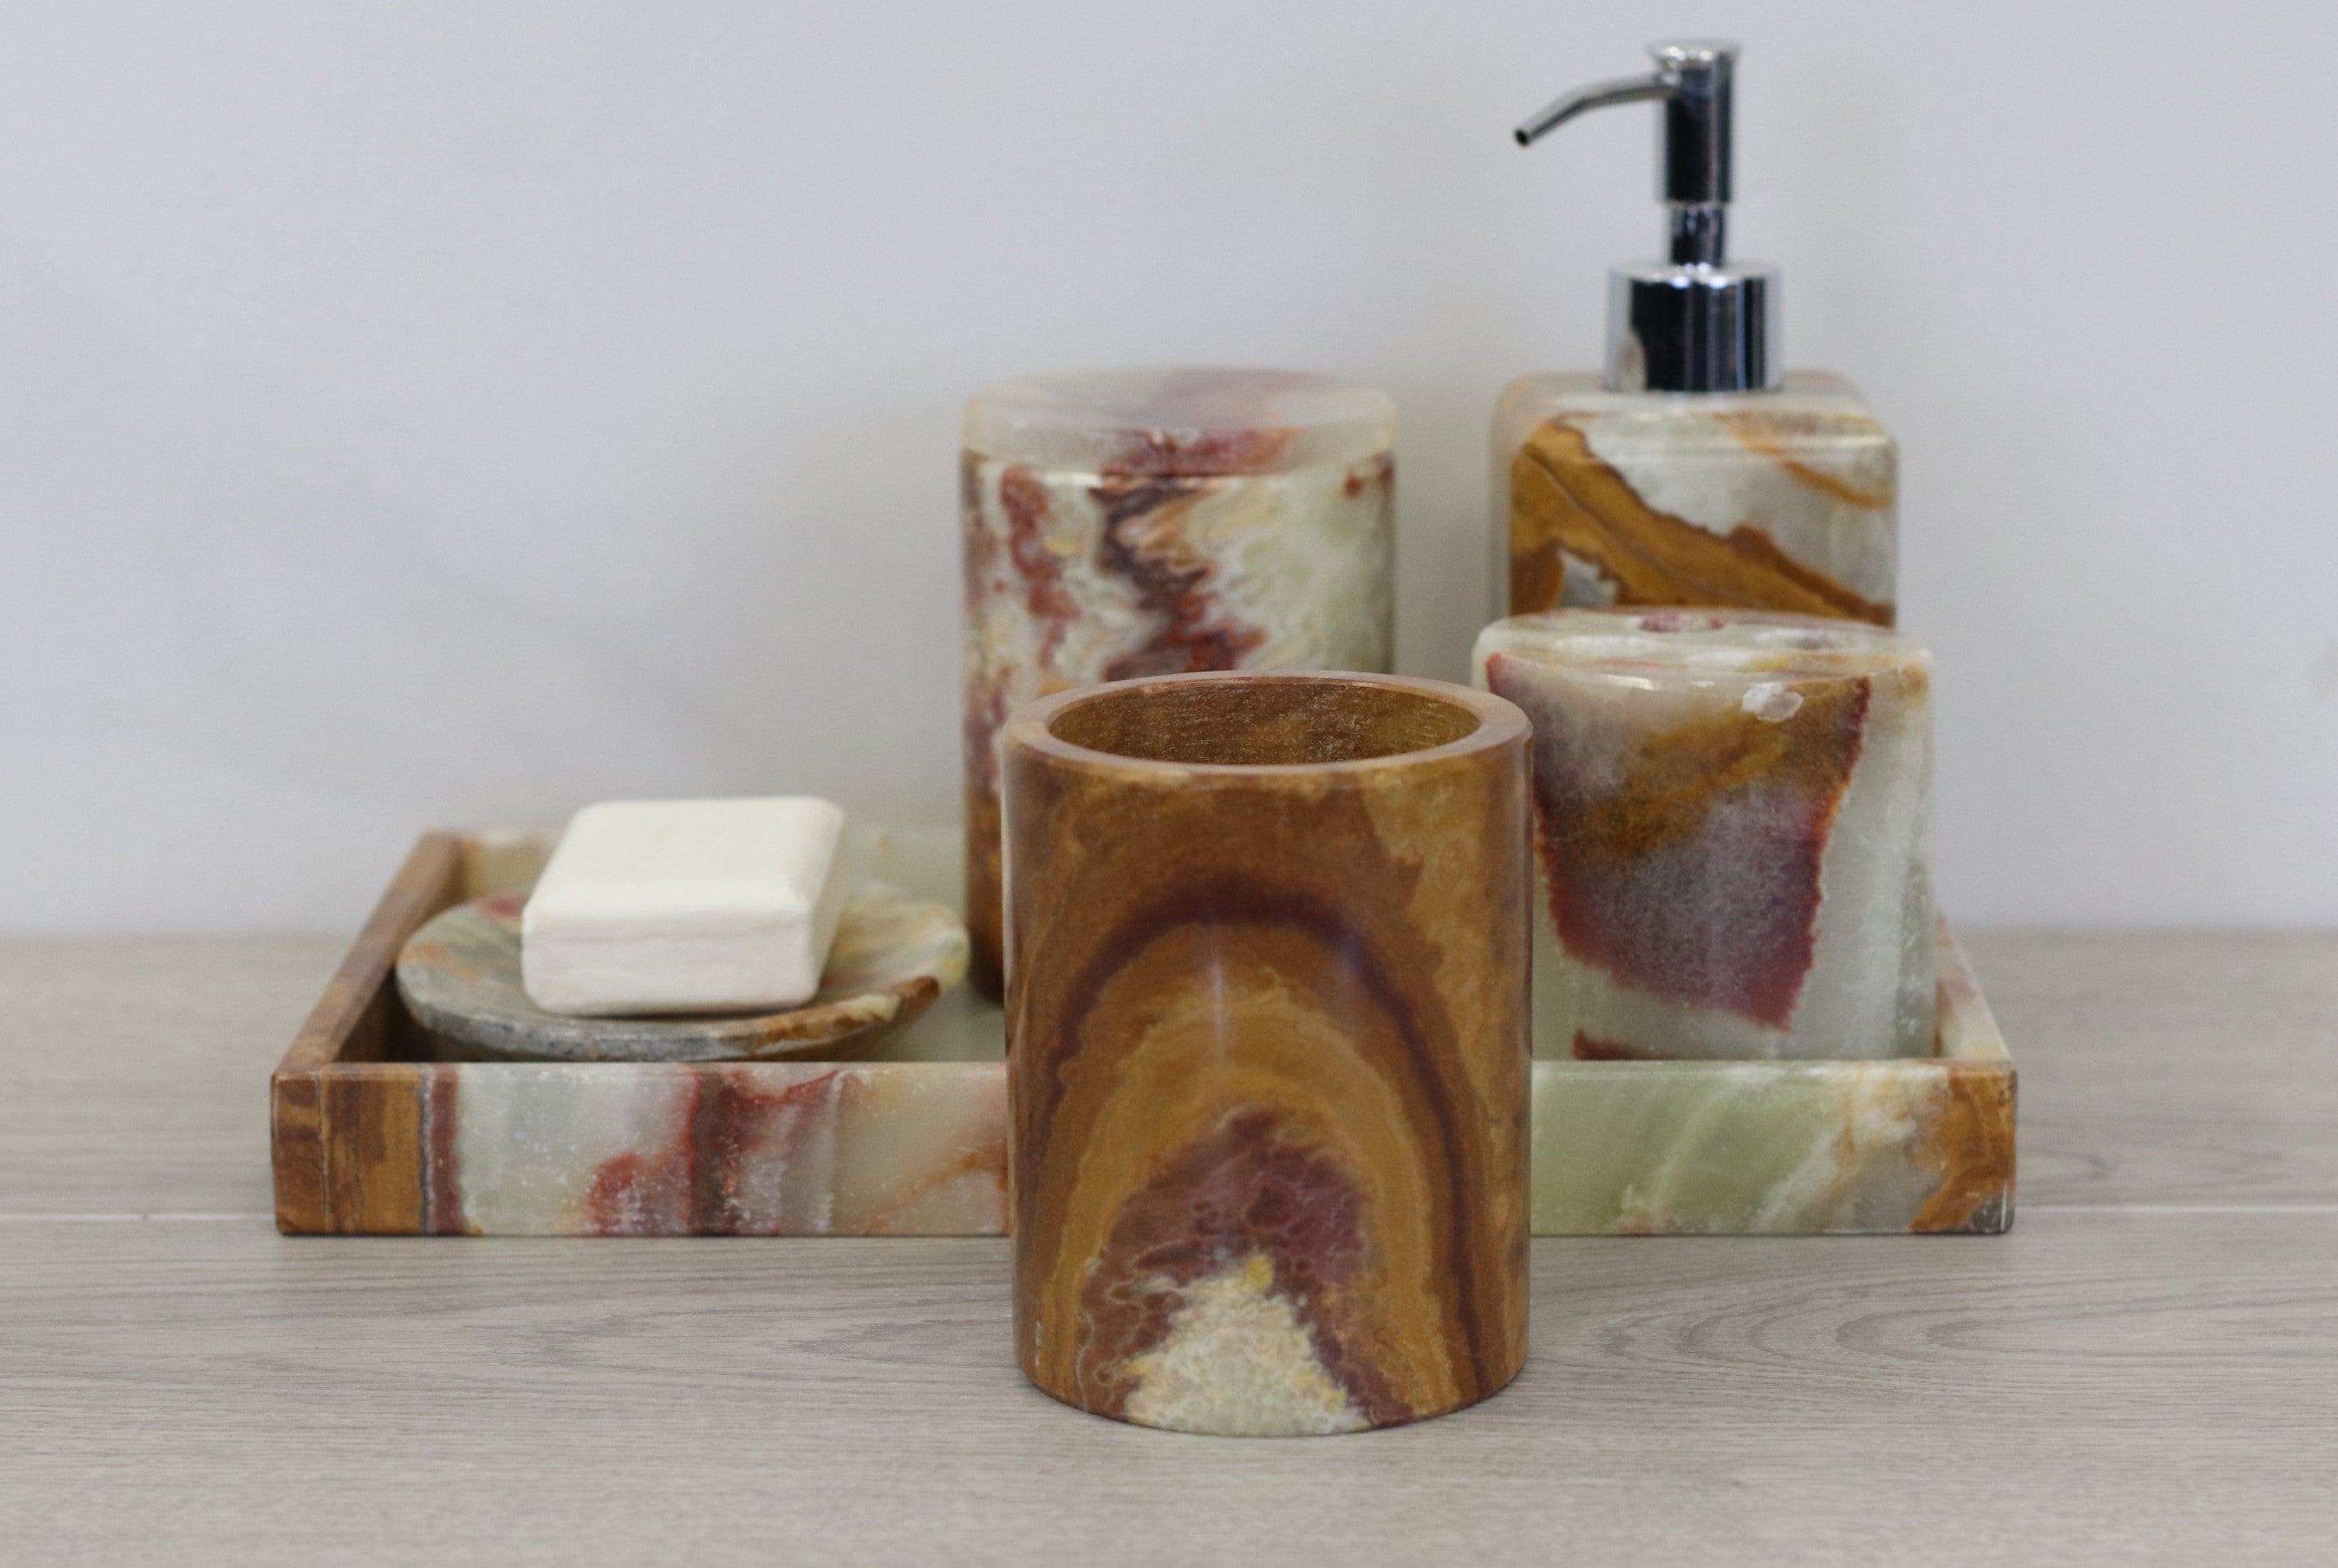 Green, Brown, and Red Onyx Stone Bathroom Accessory Set. This set includes a lotion dispenser, toothbrush holder, cup, tray, storage jar, and a soap dish. Handmade in Mexico. We package and ship from the USA. Buy now at www.felipeandgrace.com.